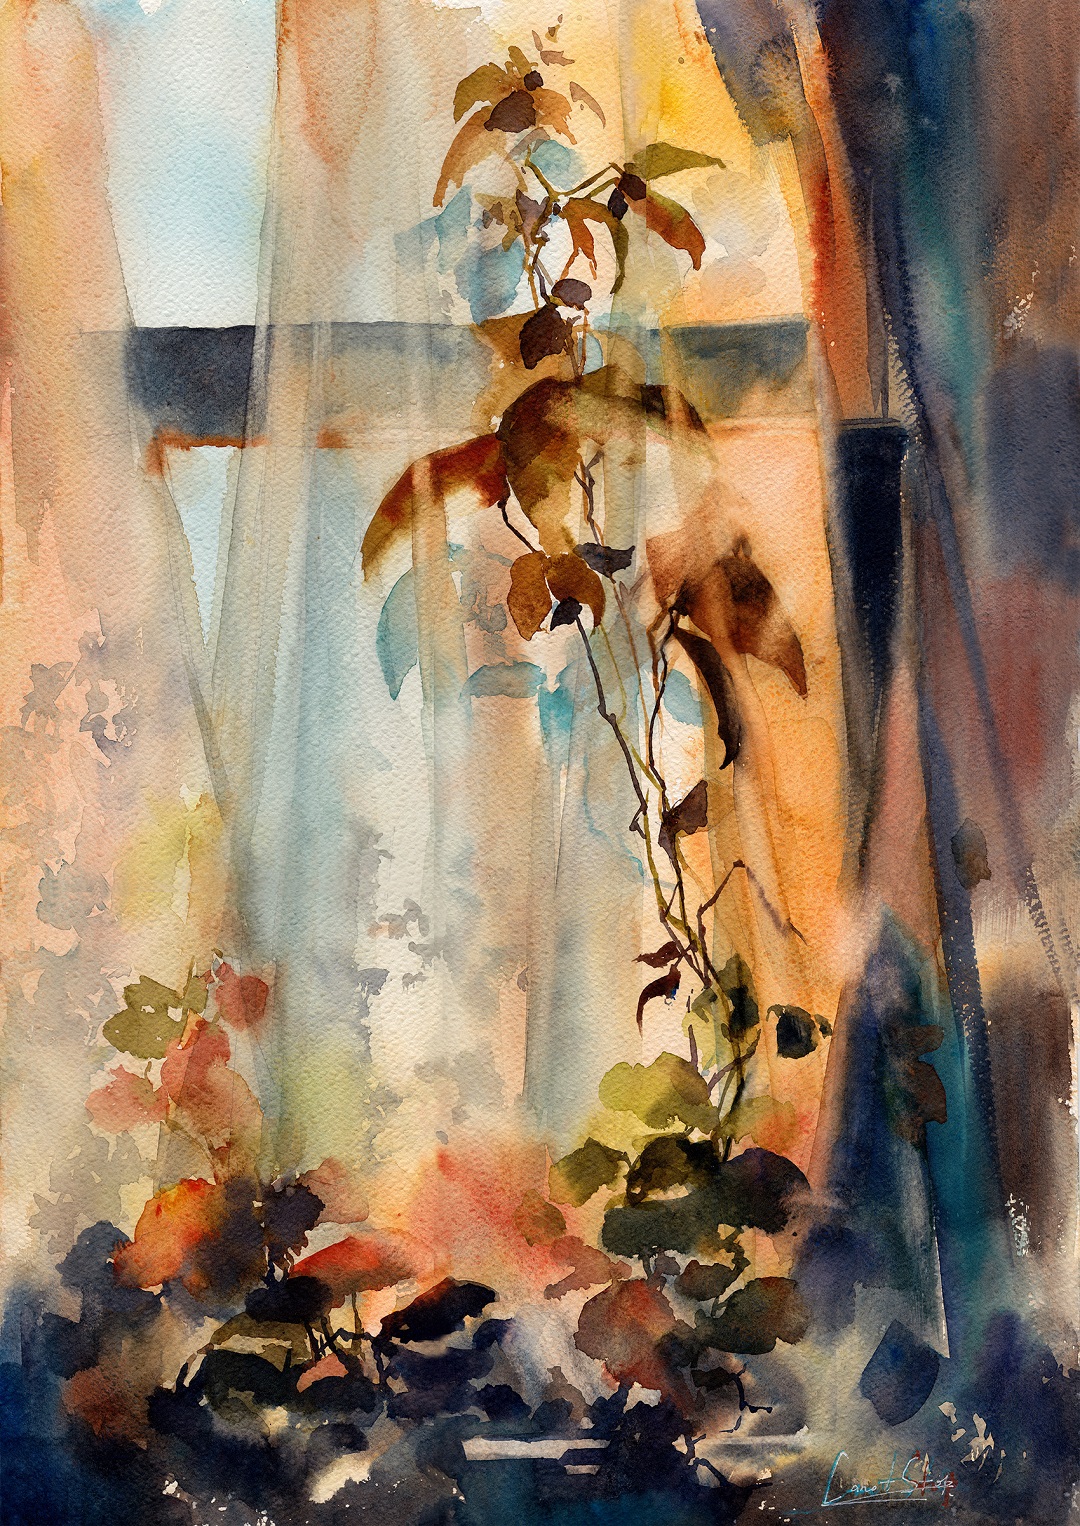 'Morning Through Curtains' Sophie Rodionov Watercolour on Fabriano Rough 140lb, 12 x 18"